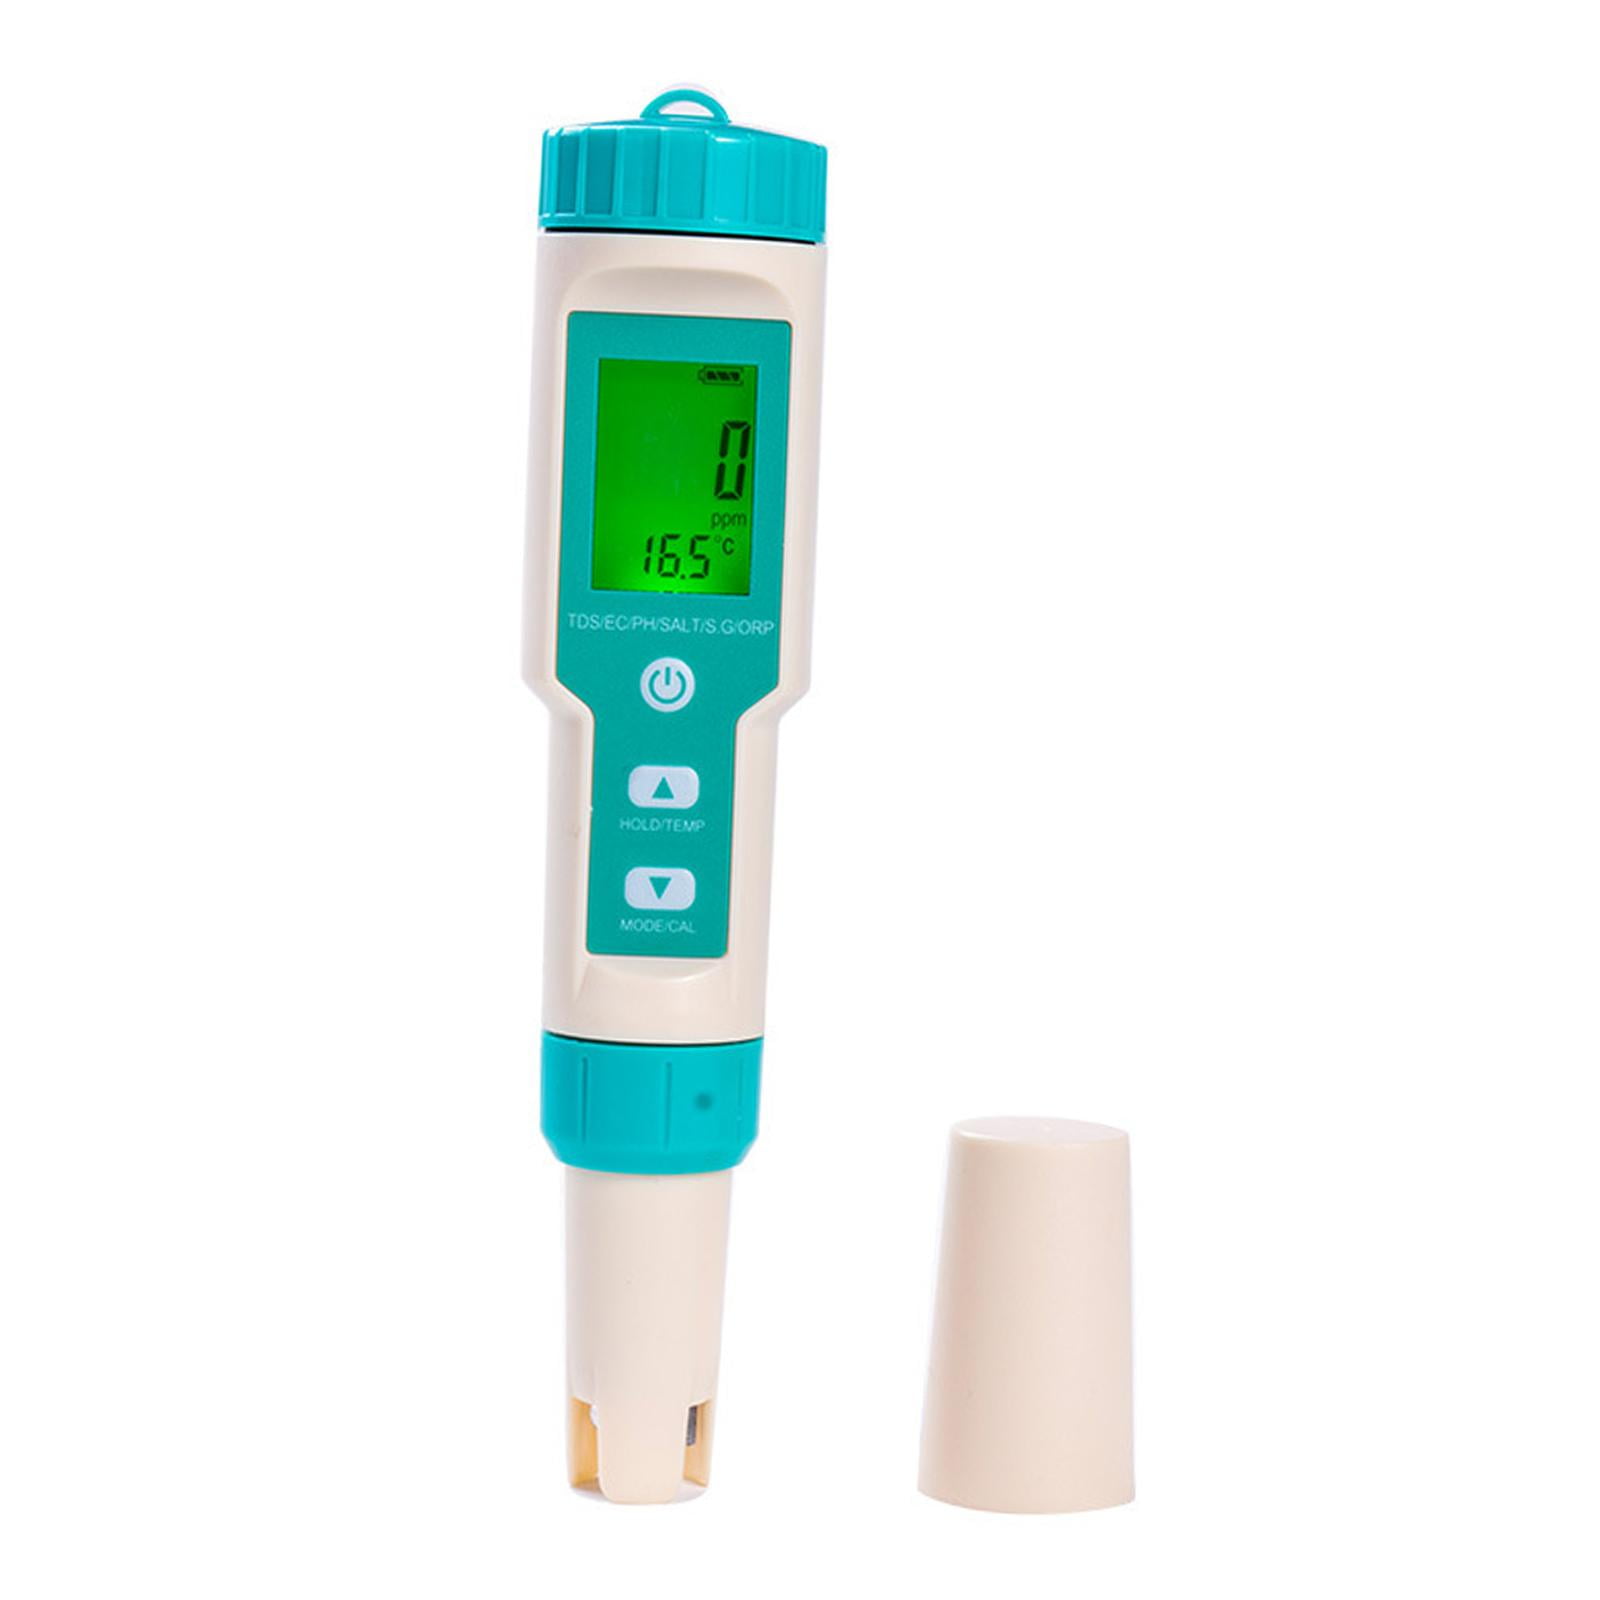 Details about   Air quality meter tester home gas thermometer analysis detector 